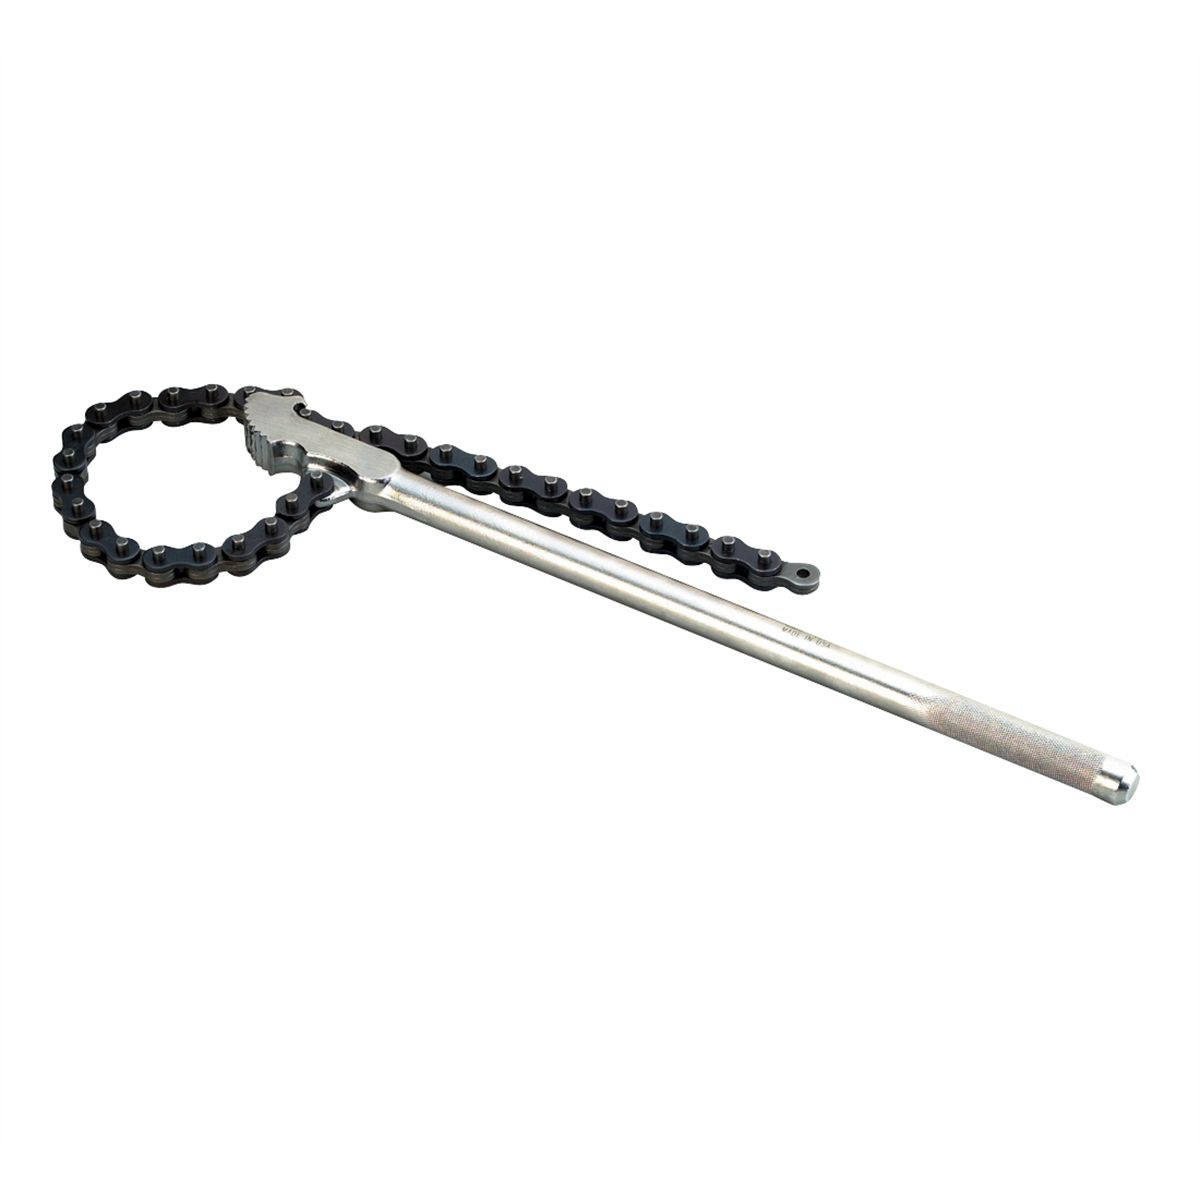 SPX Power Team 7401 Ratcheting Chain Wrench 666 lb Capacity 3 to 6 3/4 OD Handle Capacity 666' lb Capacity SPX Power Team Corporation 3 to 6 3/4 OD Handle Capacity 